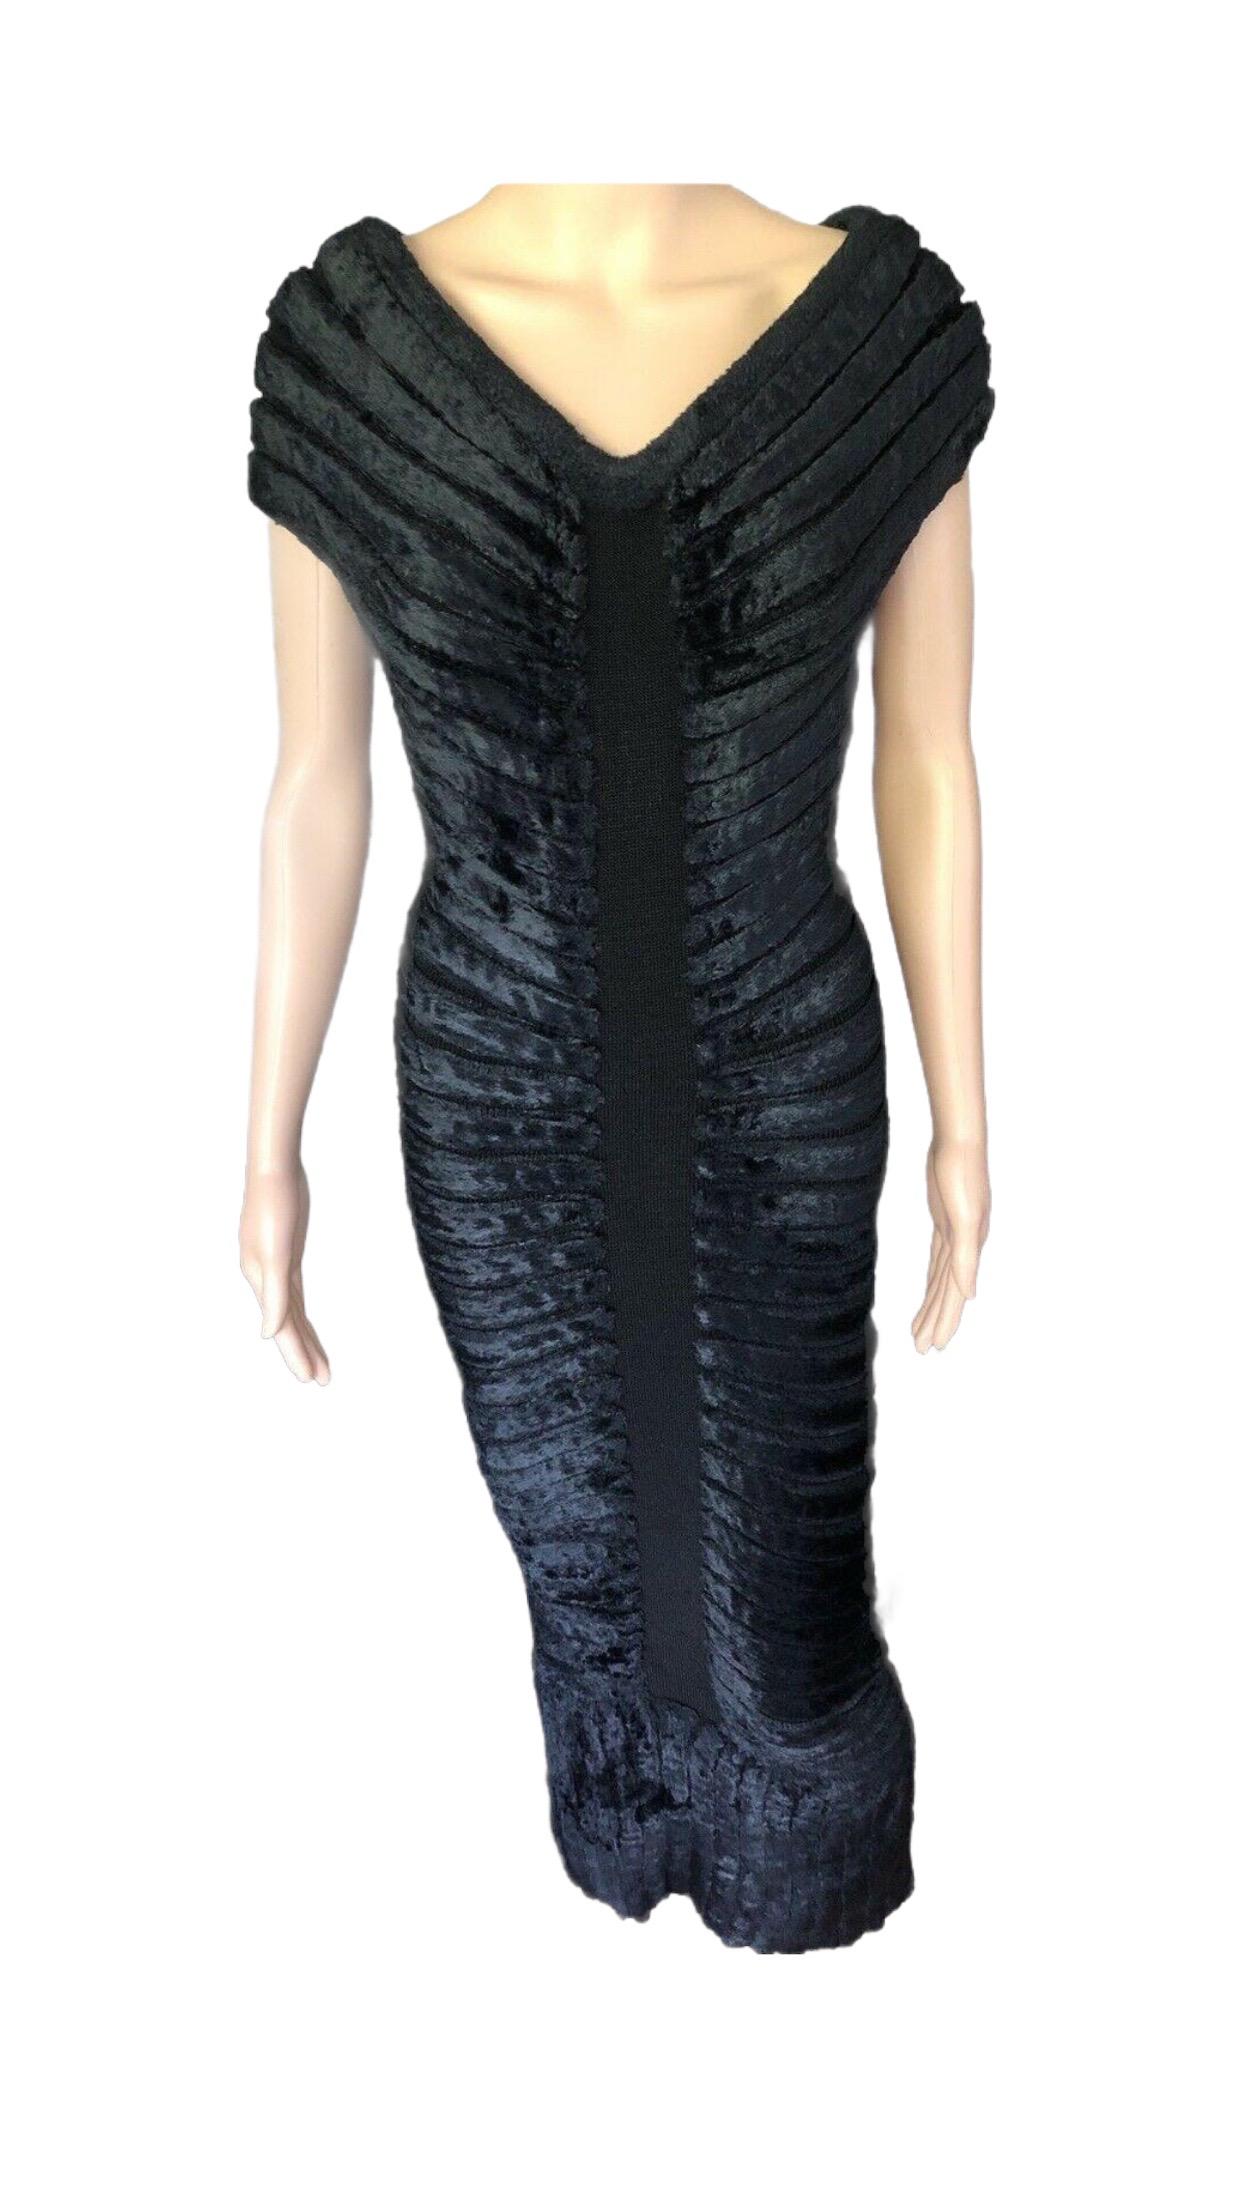 Azzedine Alaia S/S 1994 Vintage Black Long Chenille Dress In Good Condition For Sale In Naples, FL